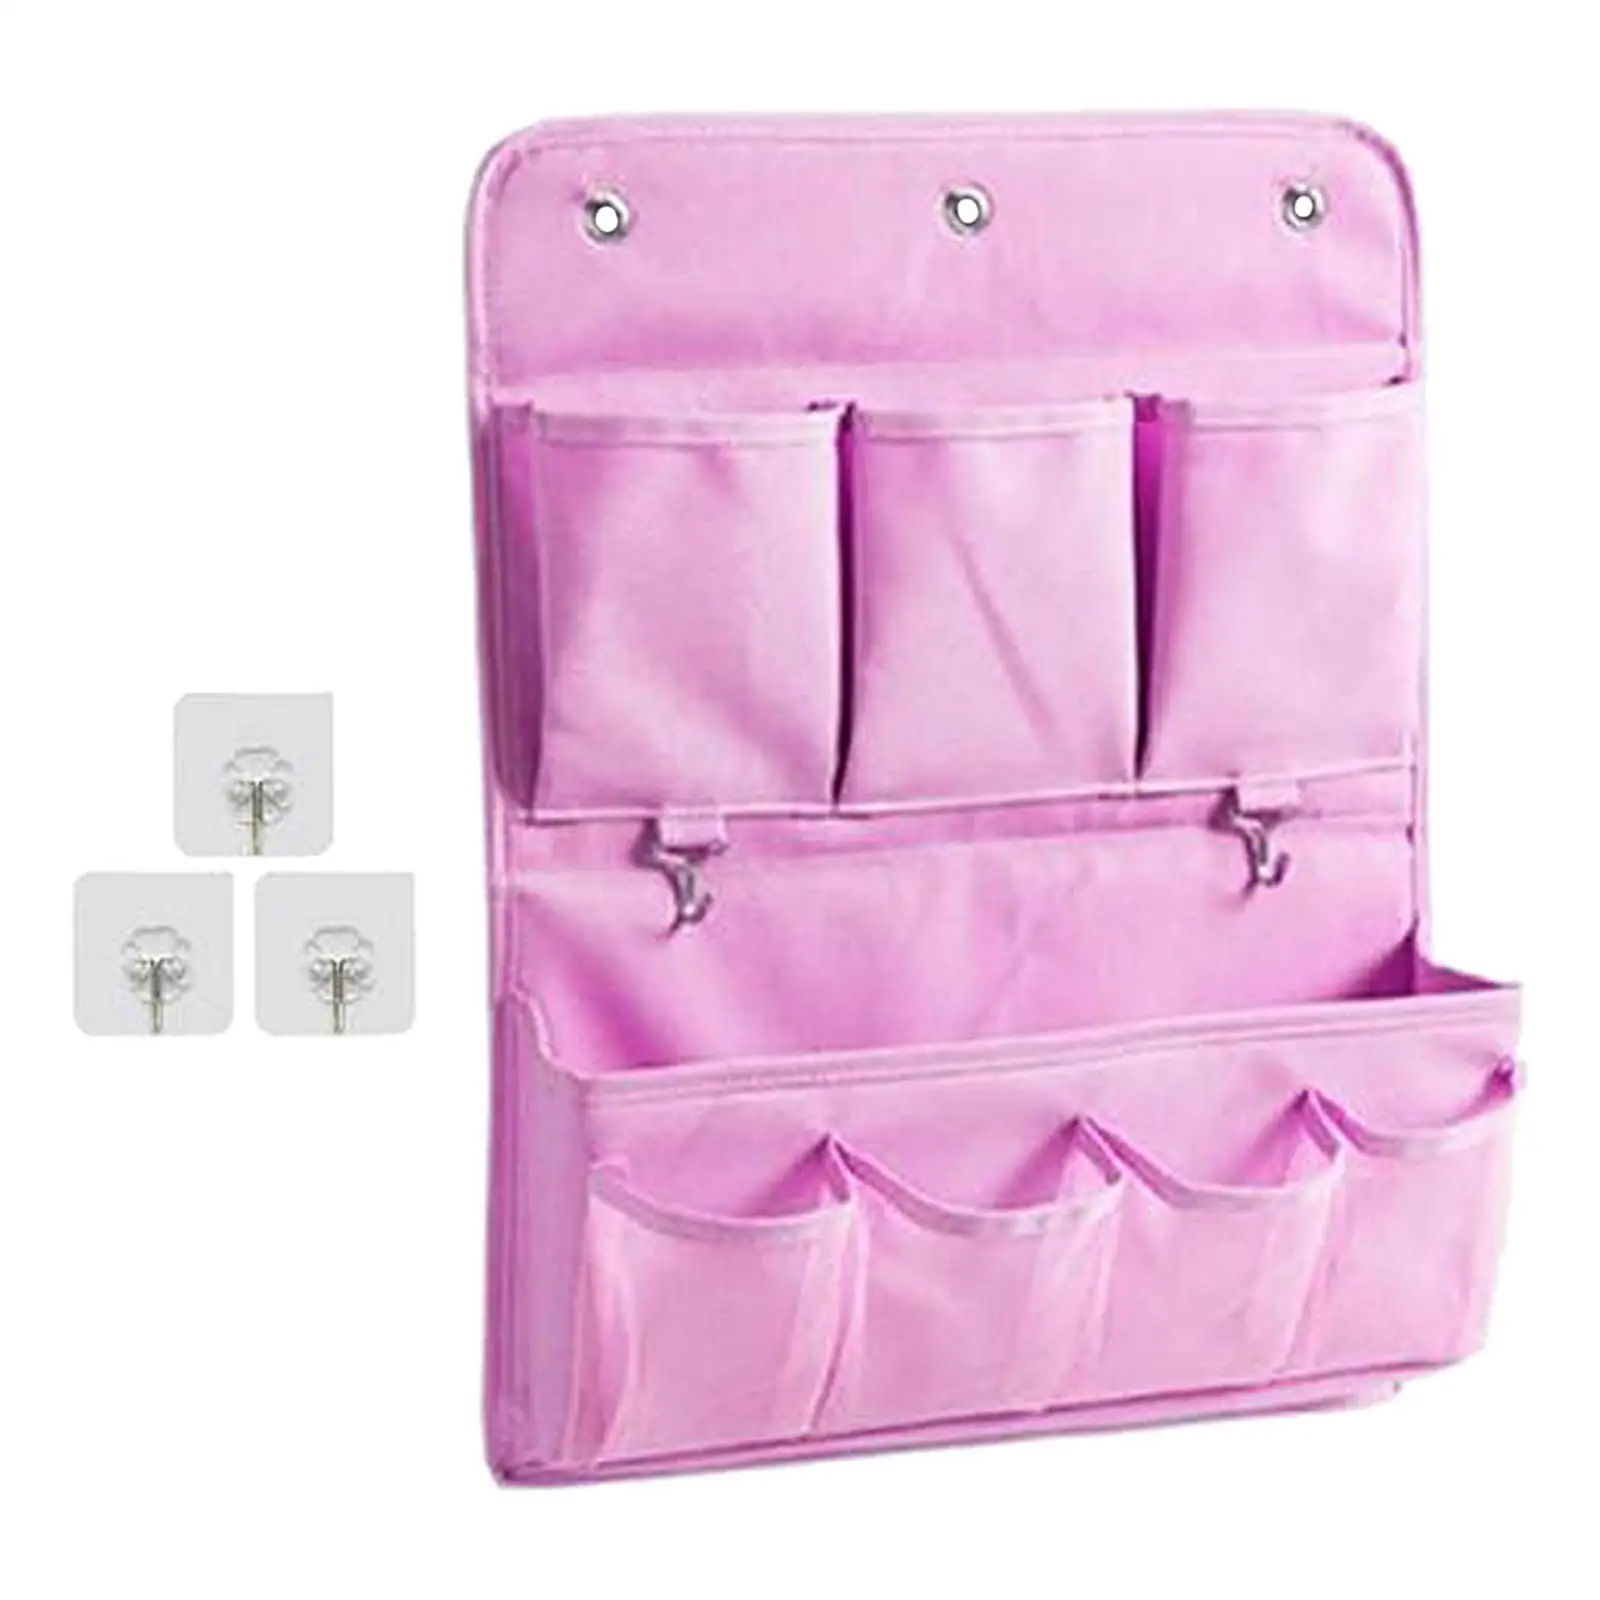 Multipurpose Organizer Bags Decoration Oxford Cloth Container for Pantry Stationery Bathroom Toiletries Cosmetic